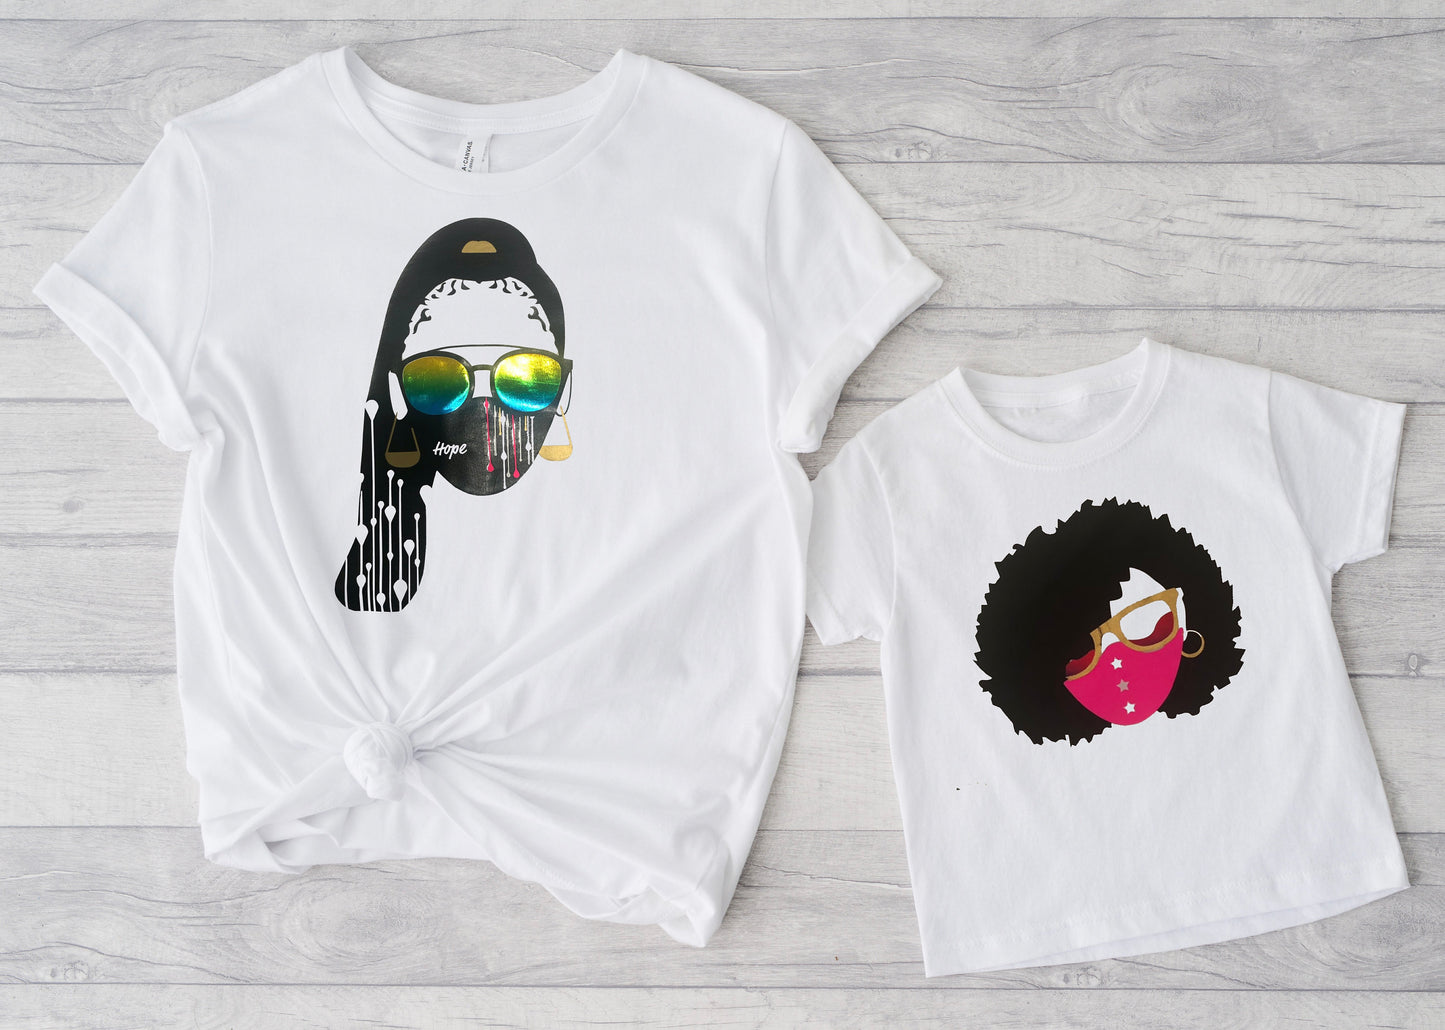 Mommy + Me - Curly fro kids t-shirt  and women’s ponytail t-shirt